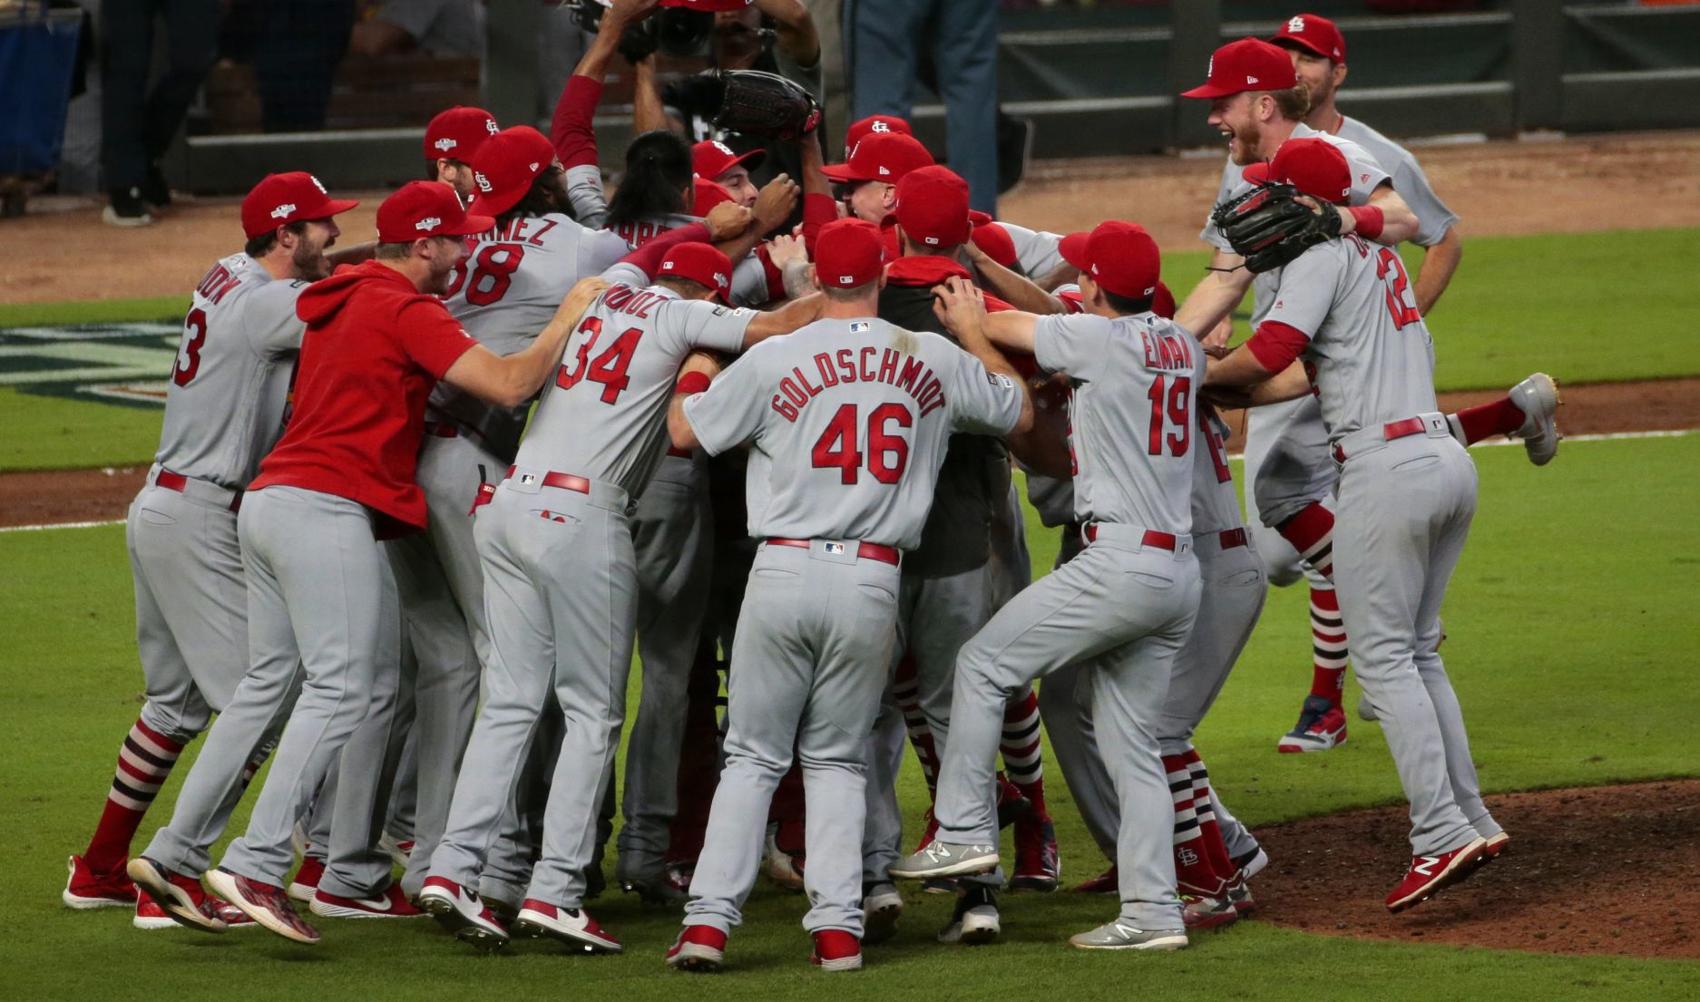 A PERFECT 10: Record-smashing inning launches Cardinals into NLCS vs. Nationals